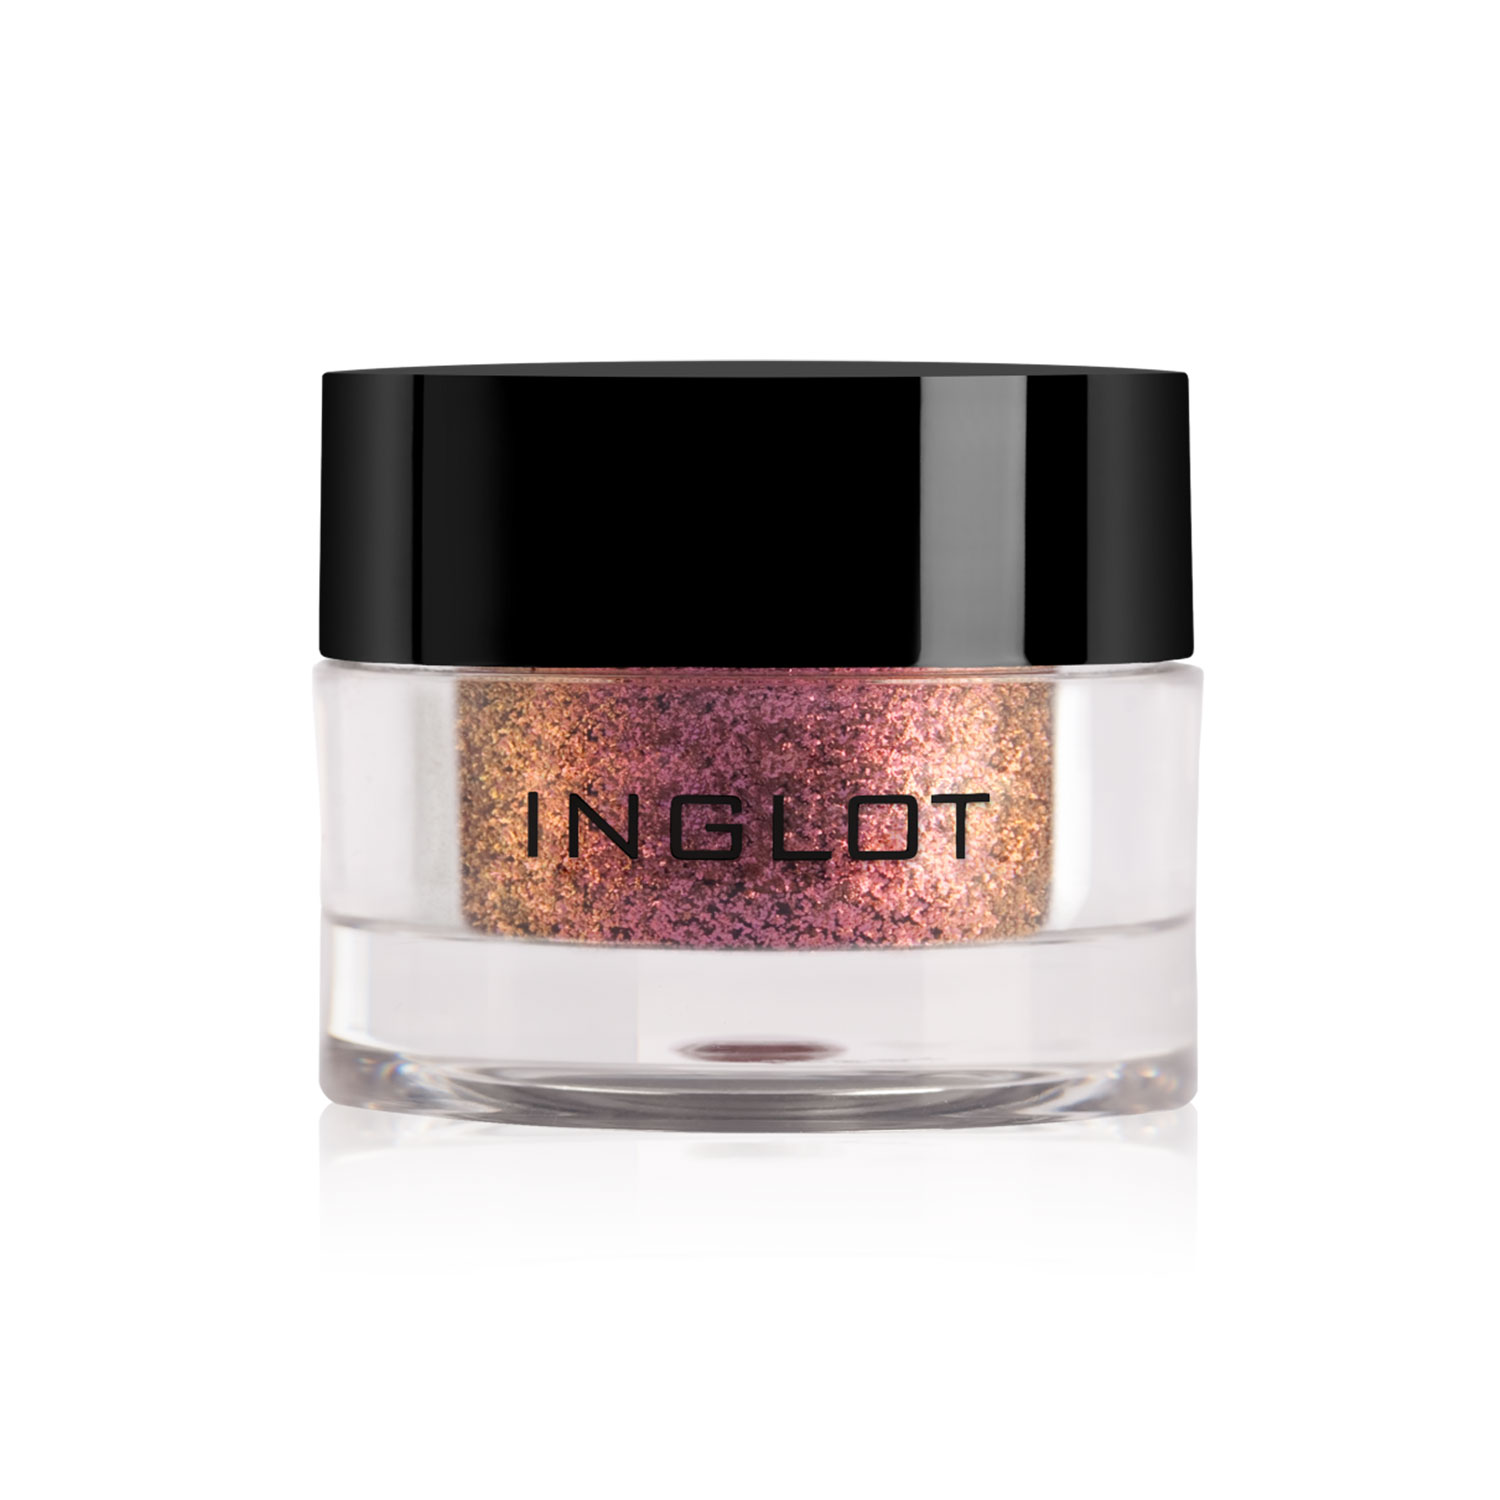 Inglot  Amc Pure Pigment Eye Shadow, 2g-86 Dark Coppers